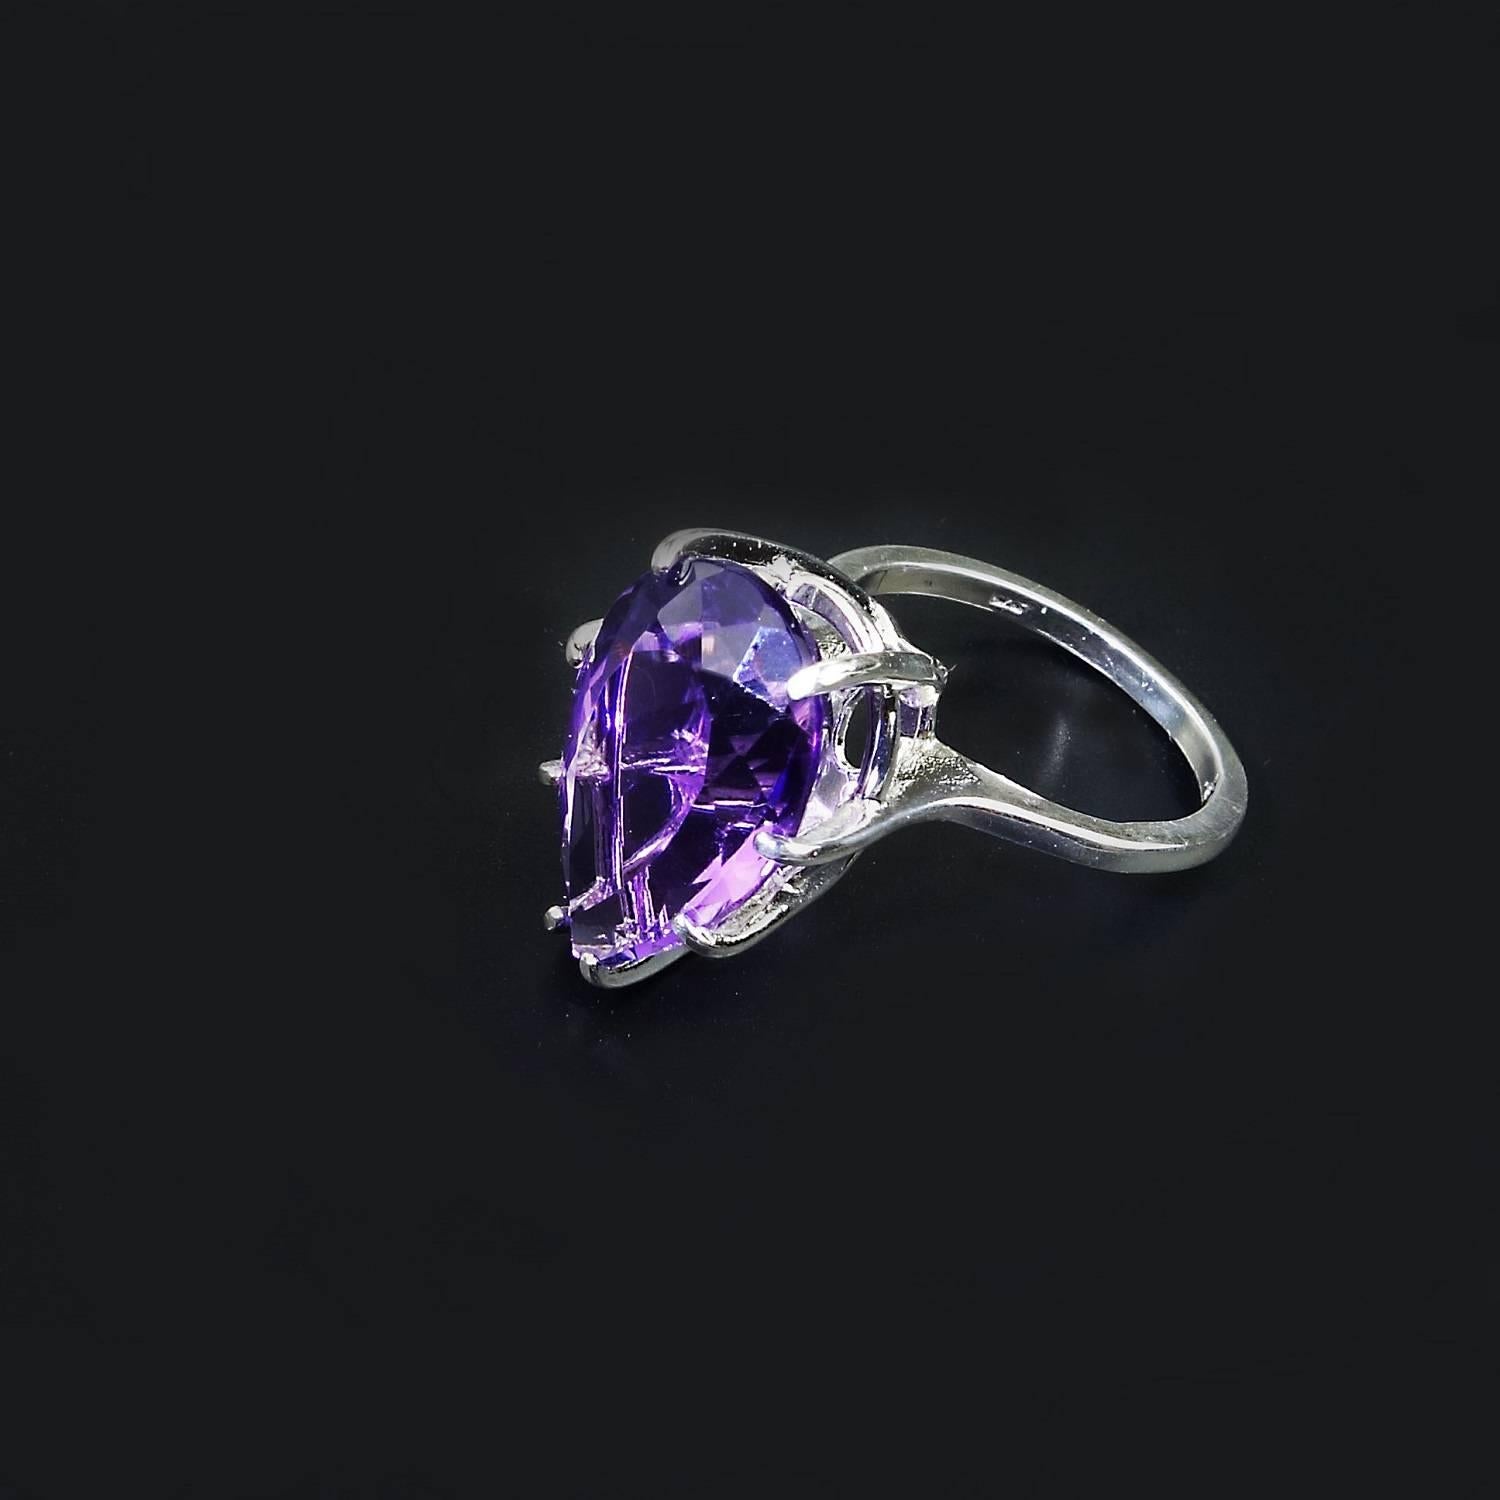 Custom made flashing Brazilian Pear shaped Amethyst set in Basket Style Sterling Silver ring.  This 10.85 carat Gemstone is a joy to wear.  This stunning gemstone came from our favorite supplier in the mountains outside of Rio de Janeiro. Amethysts